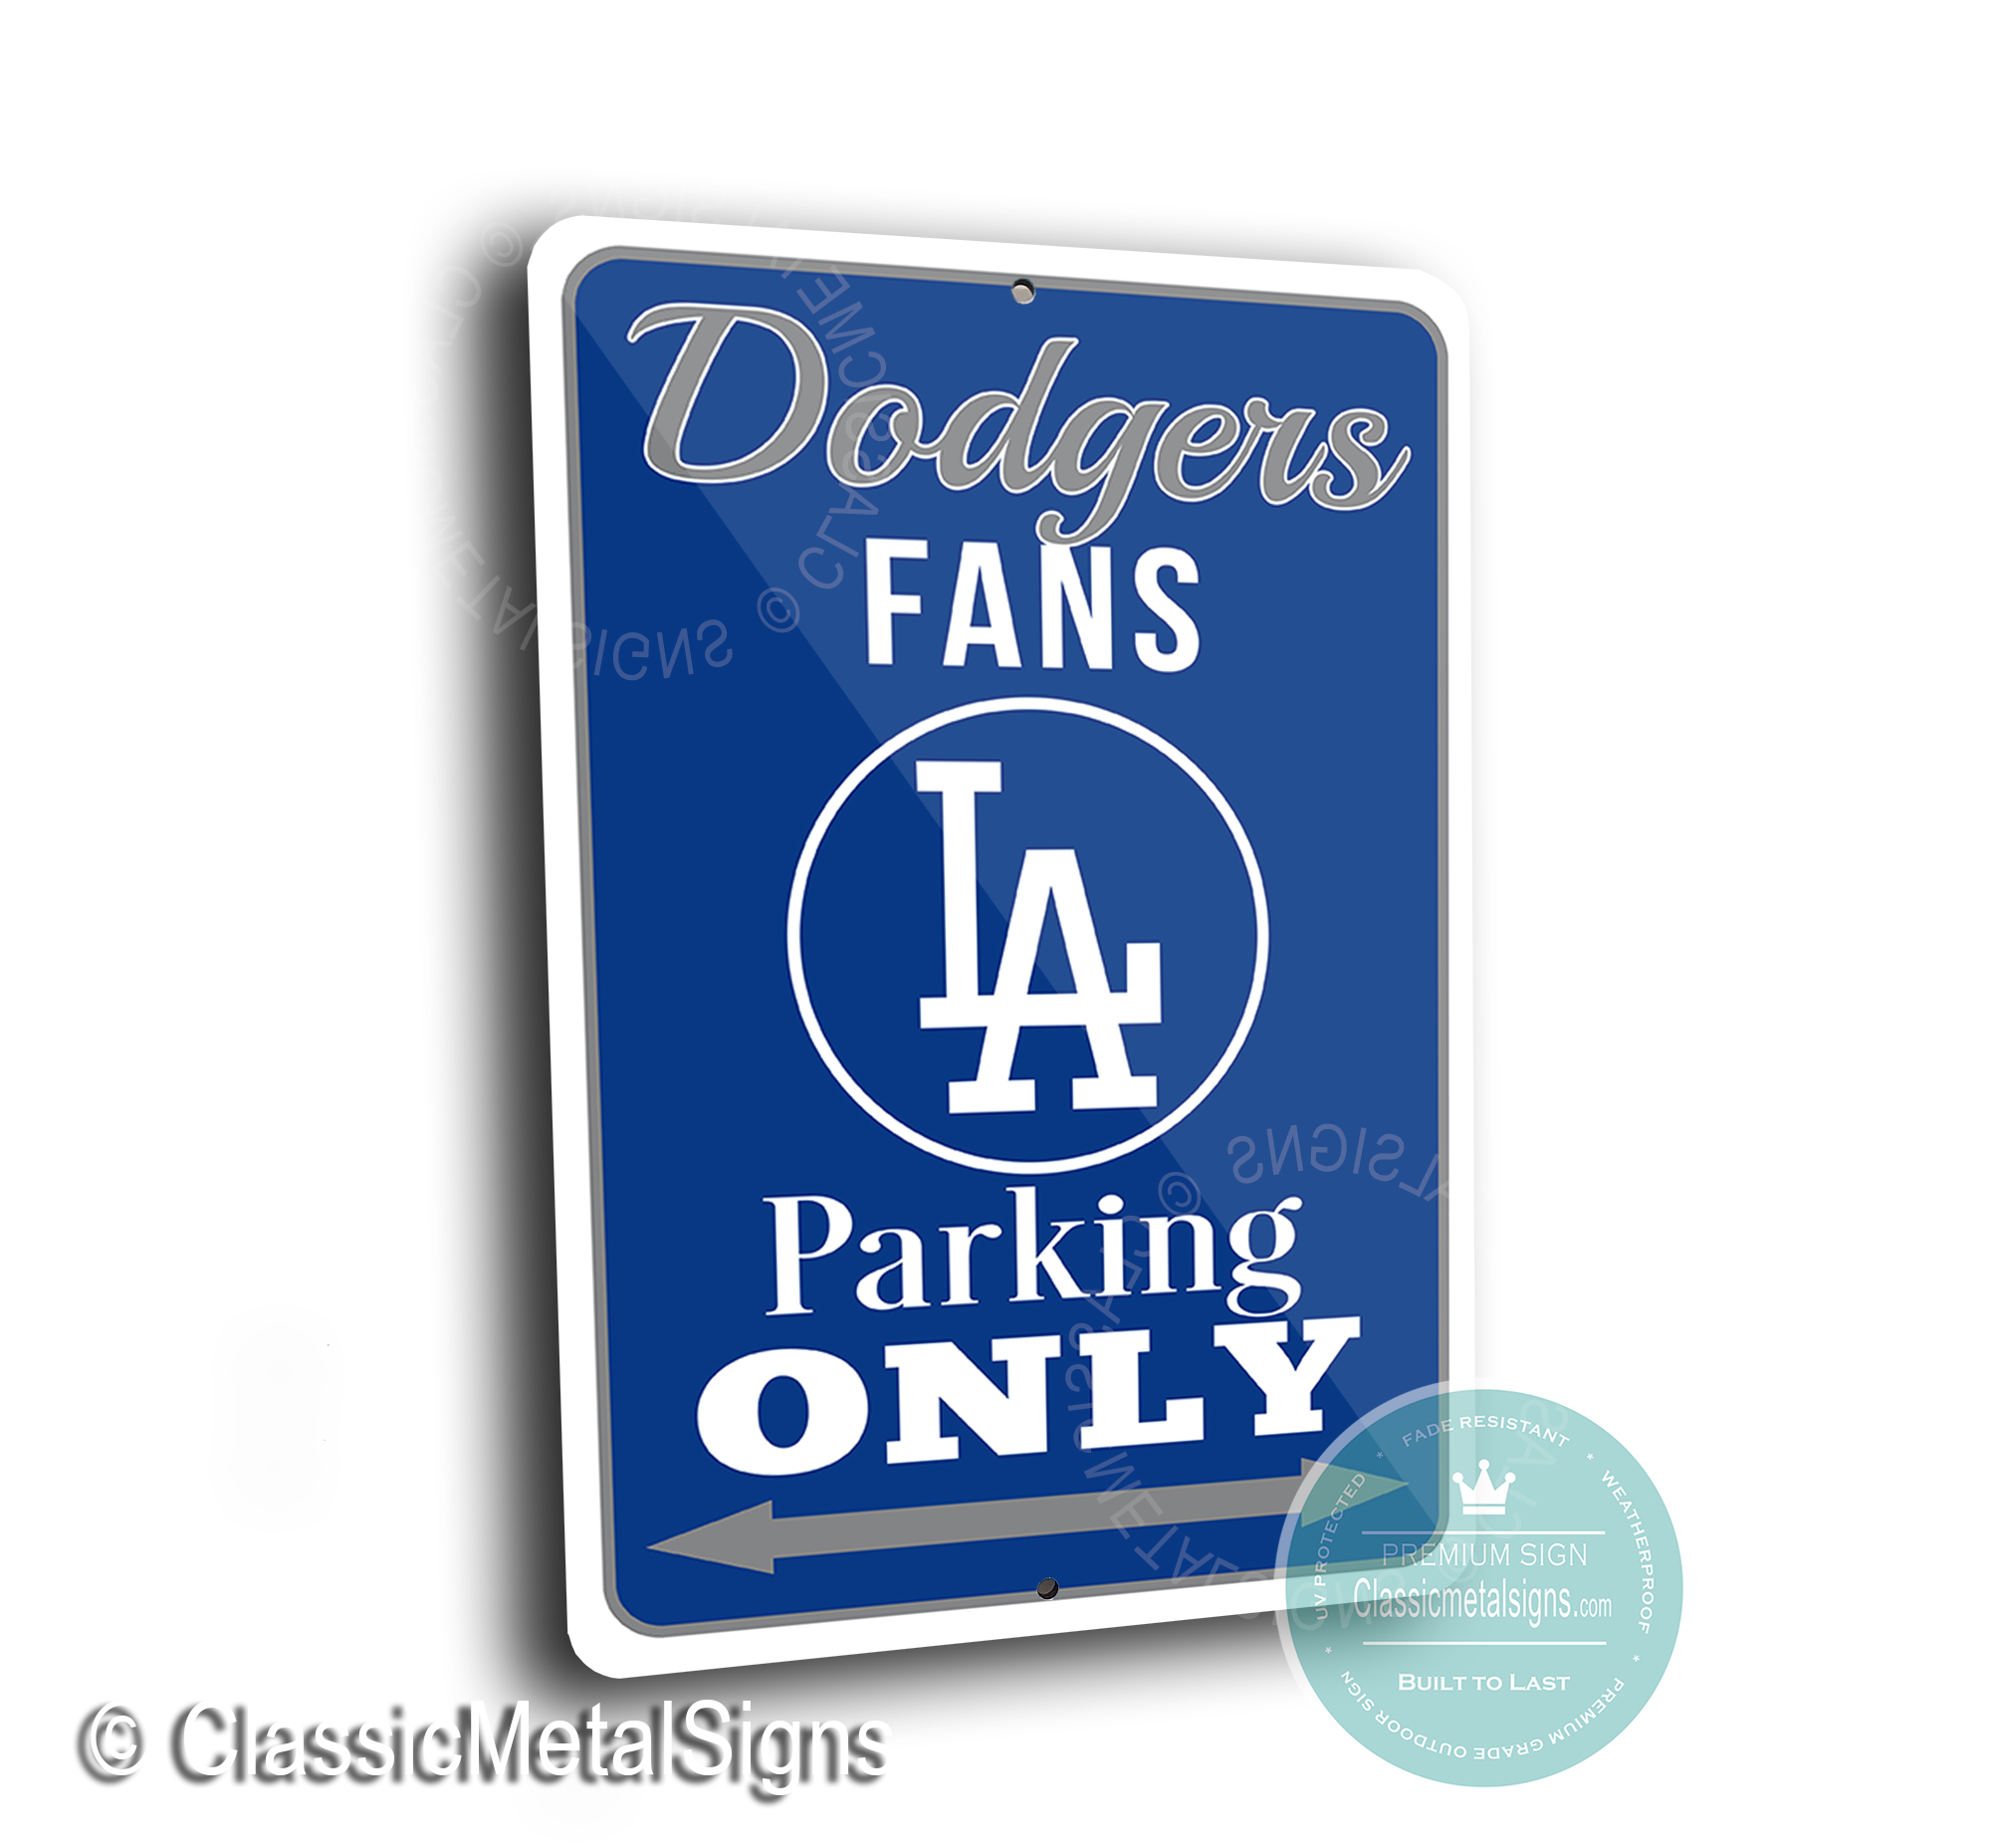 Dodgers Parking Only signs